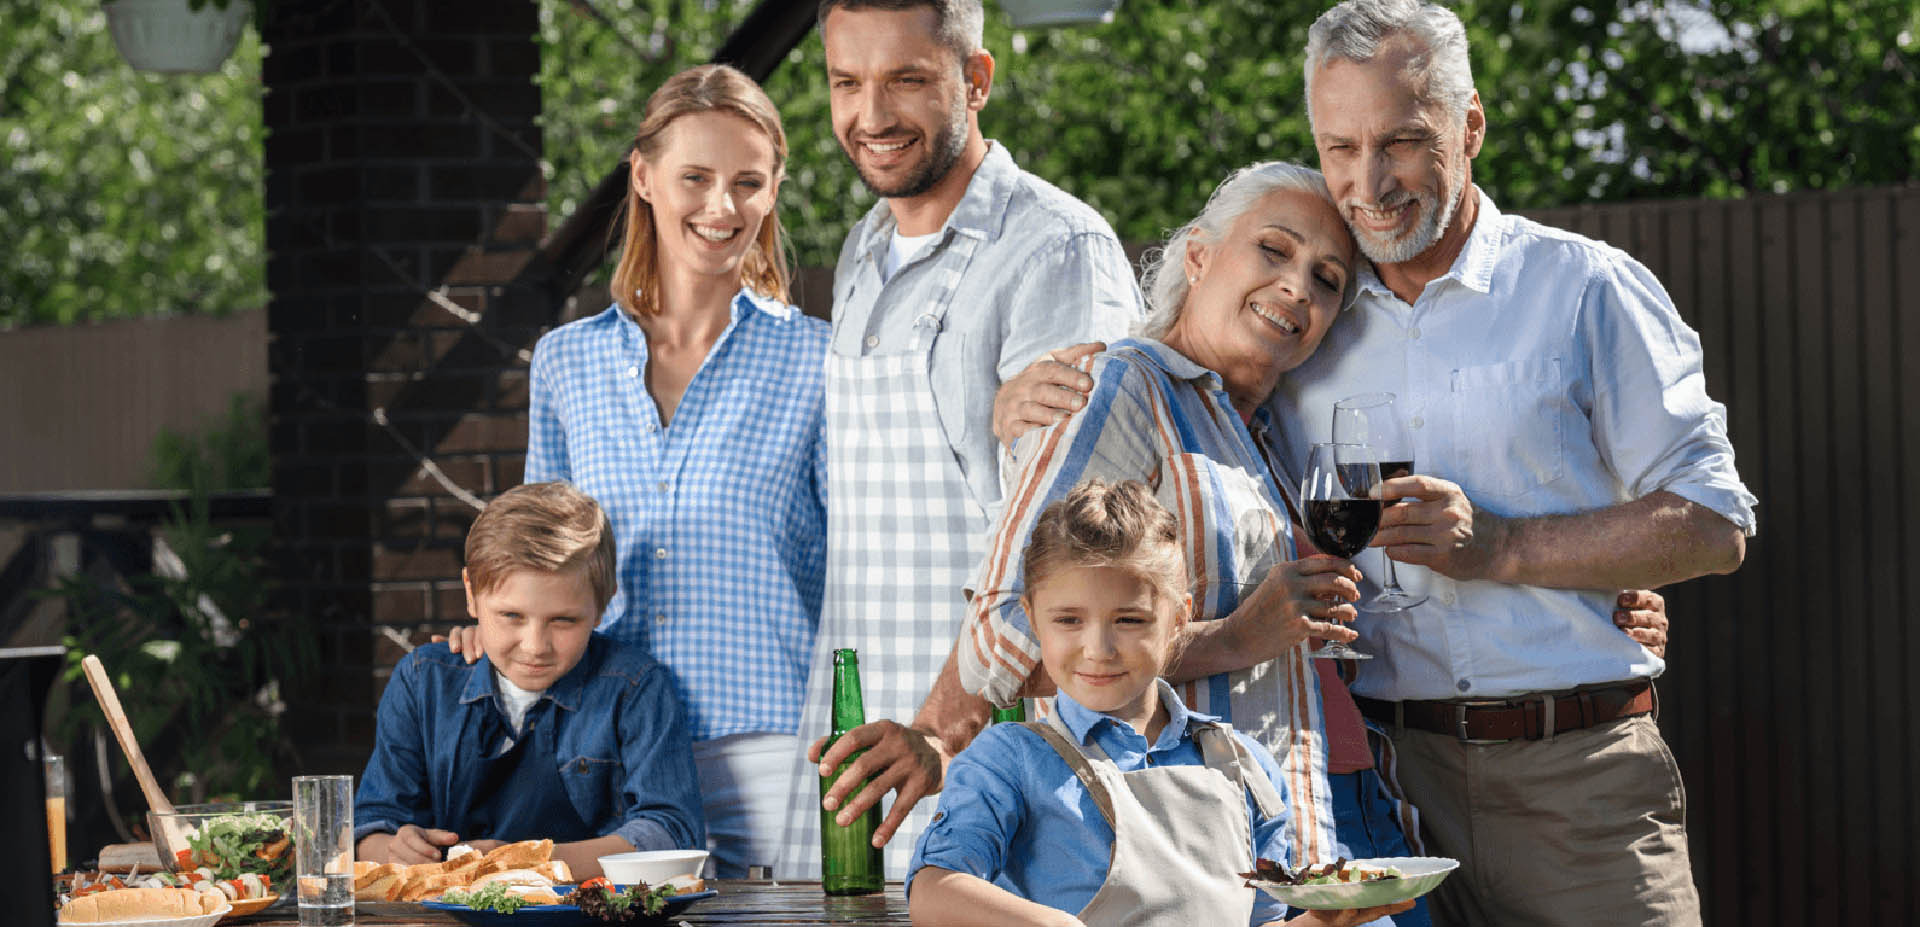 home-model-options-multigenerational-families-featured-image